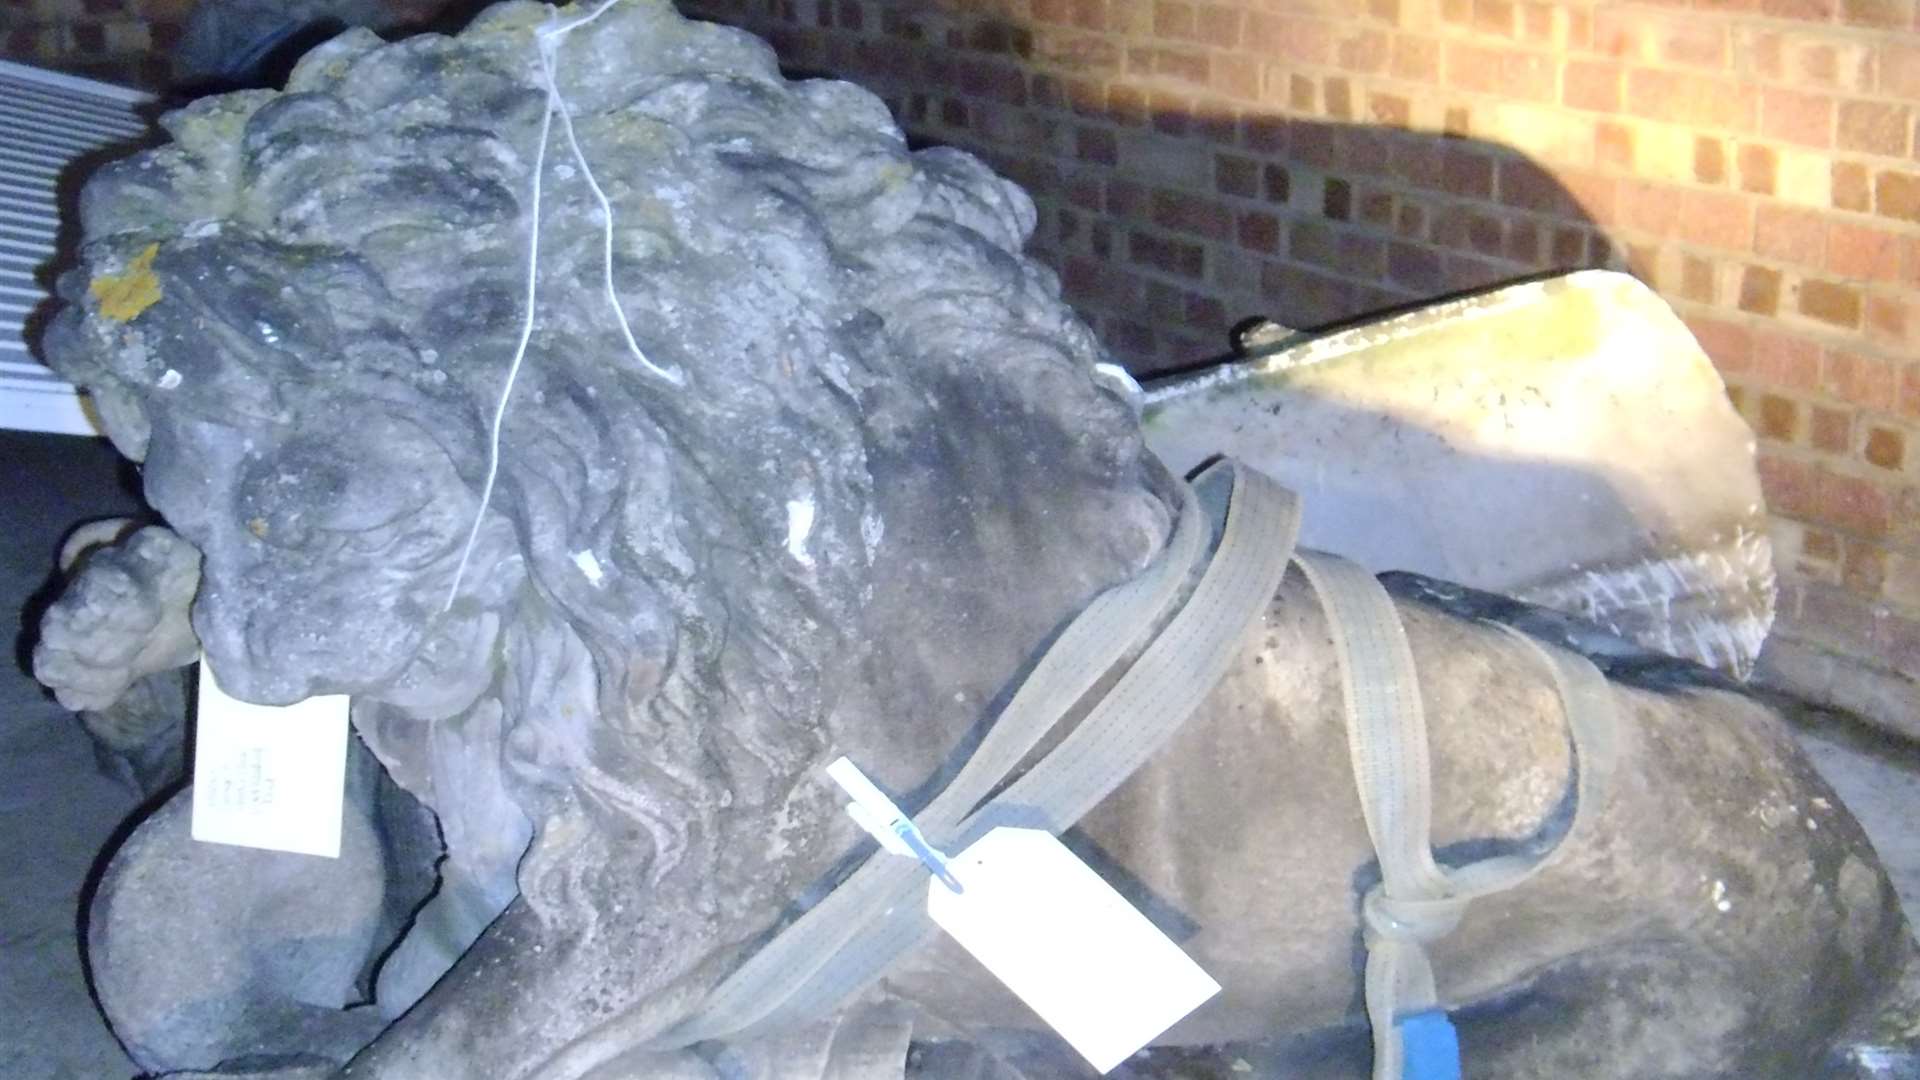 One of the recovered lions discovered in a garage